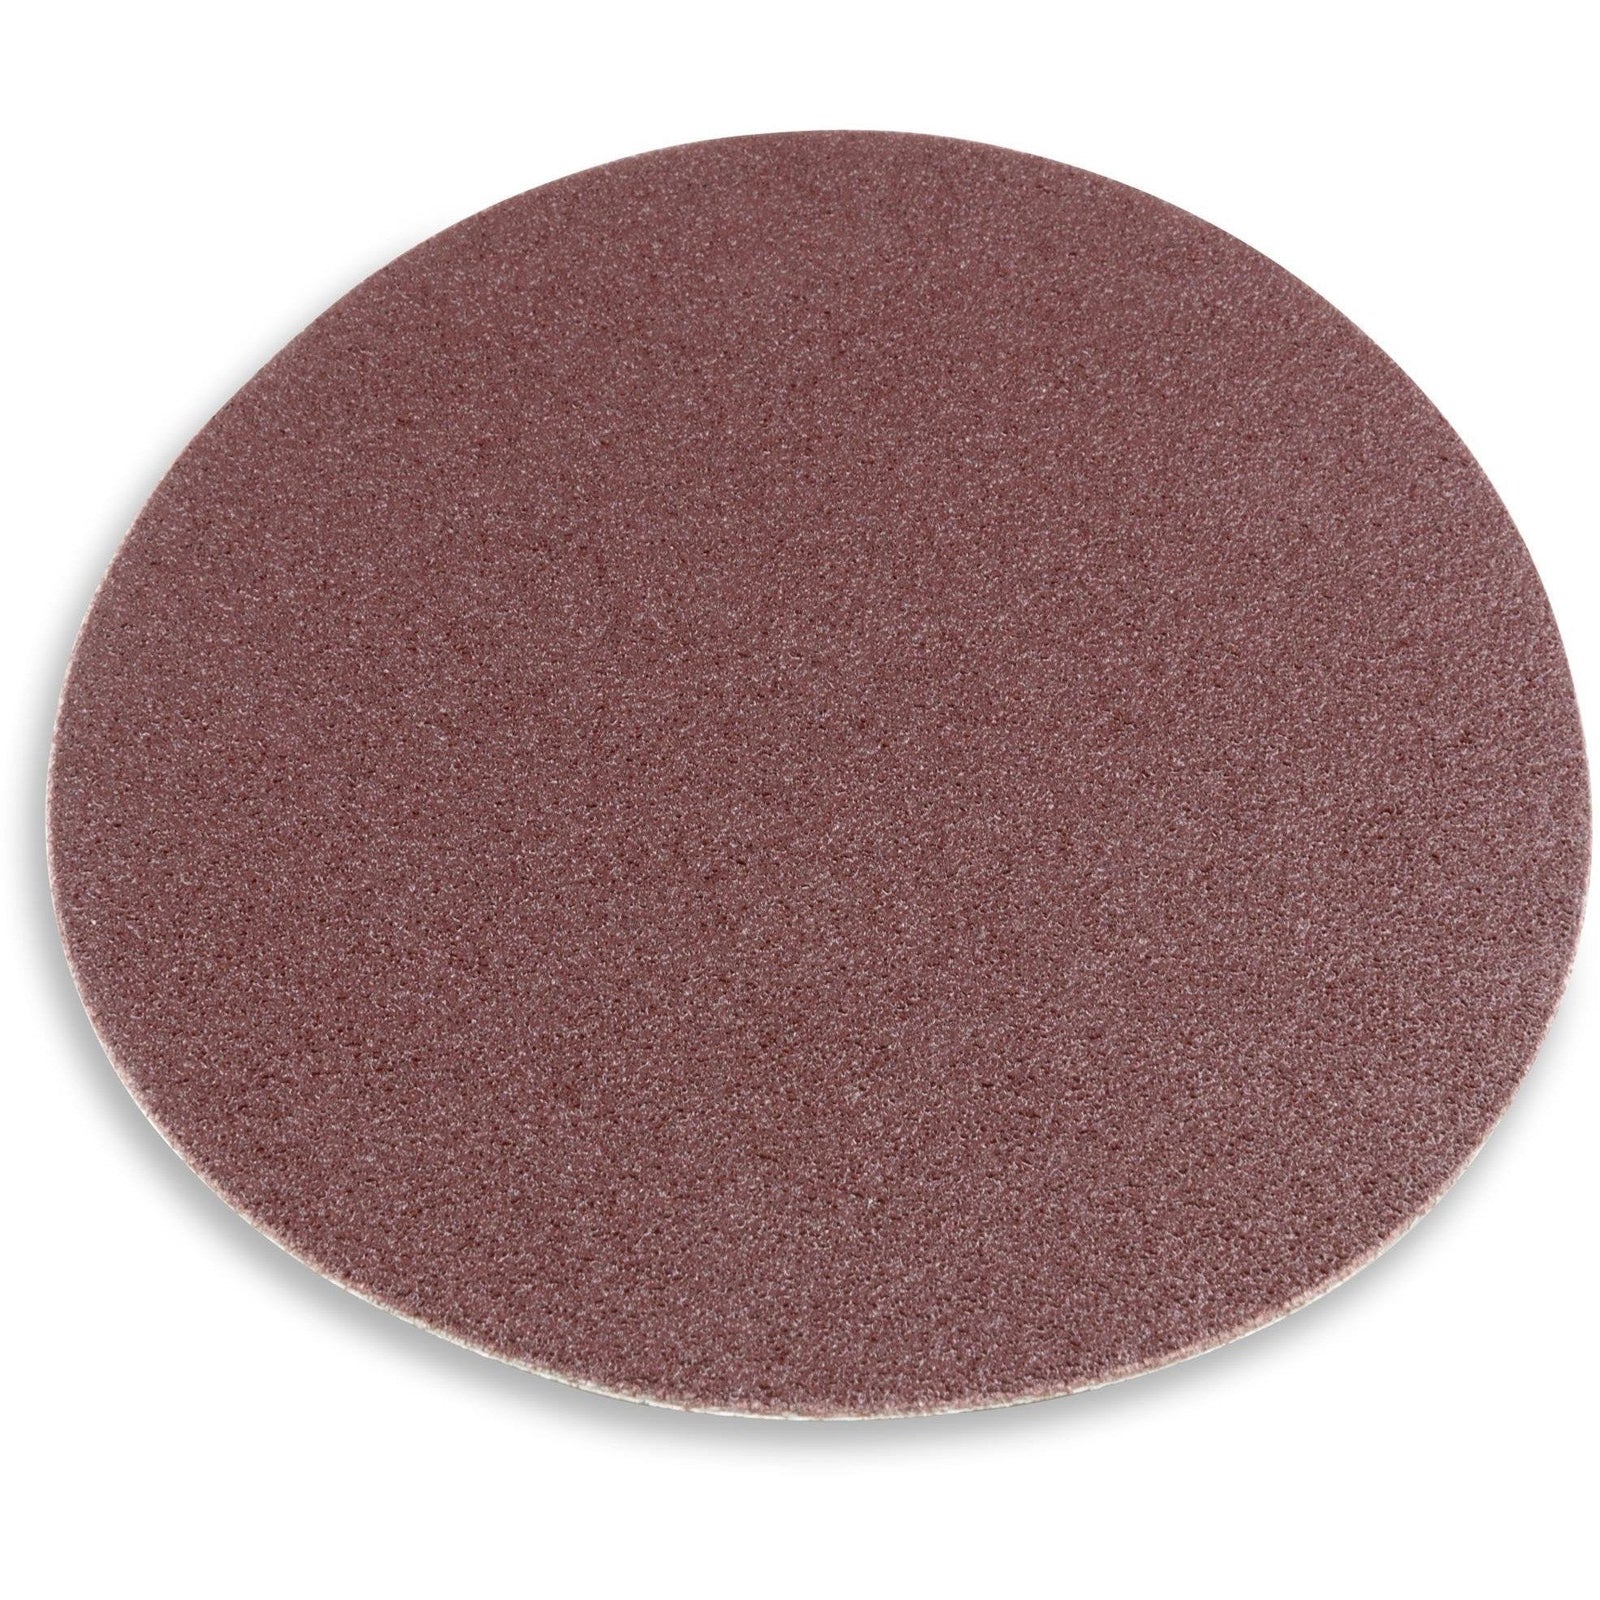 5 Inch Hook and Loop Gold Sanding Discs, 50 Pack - Red Label Abrasives